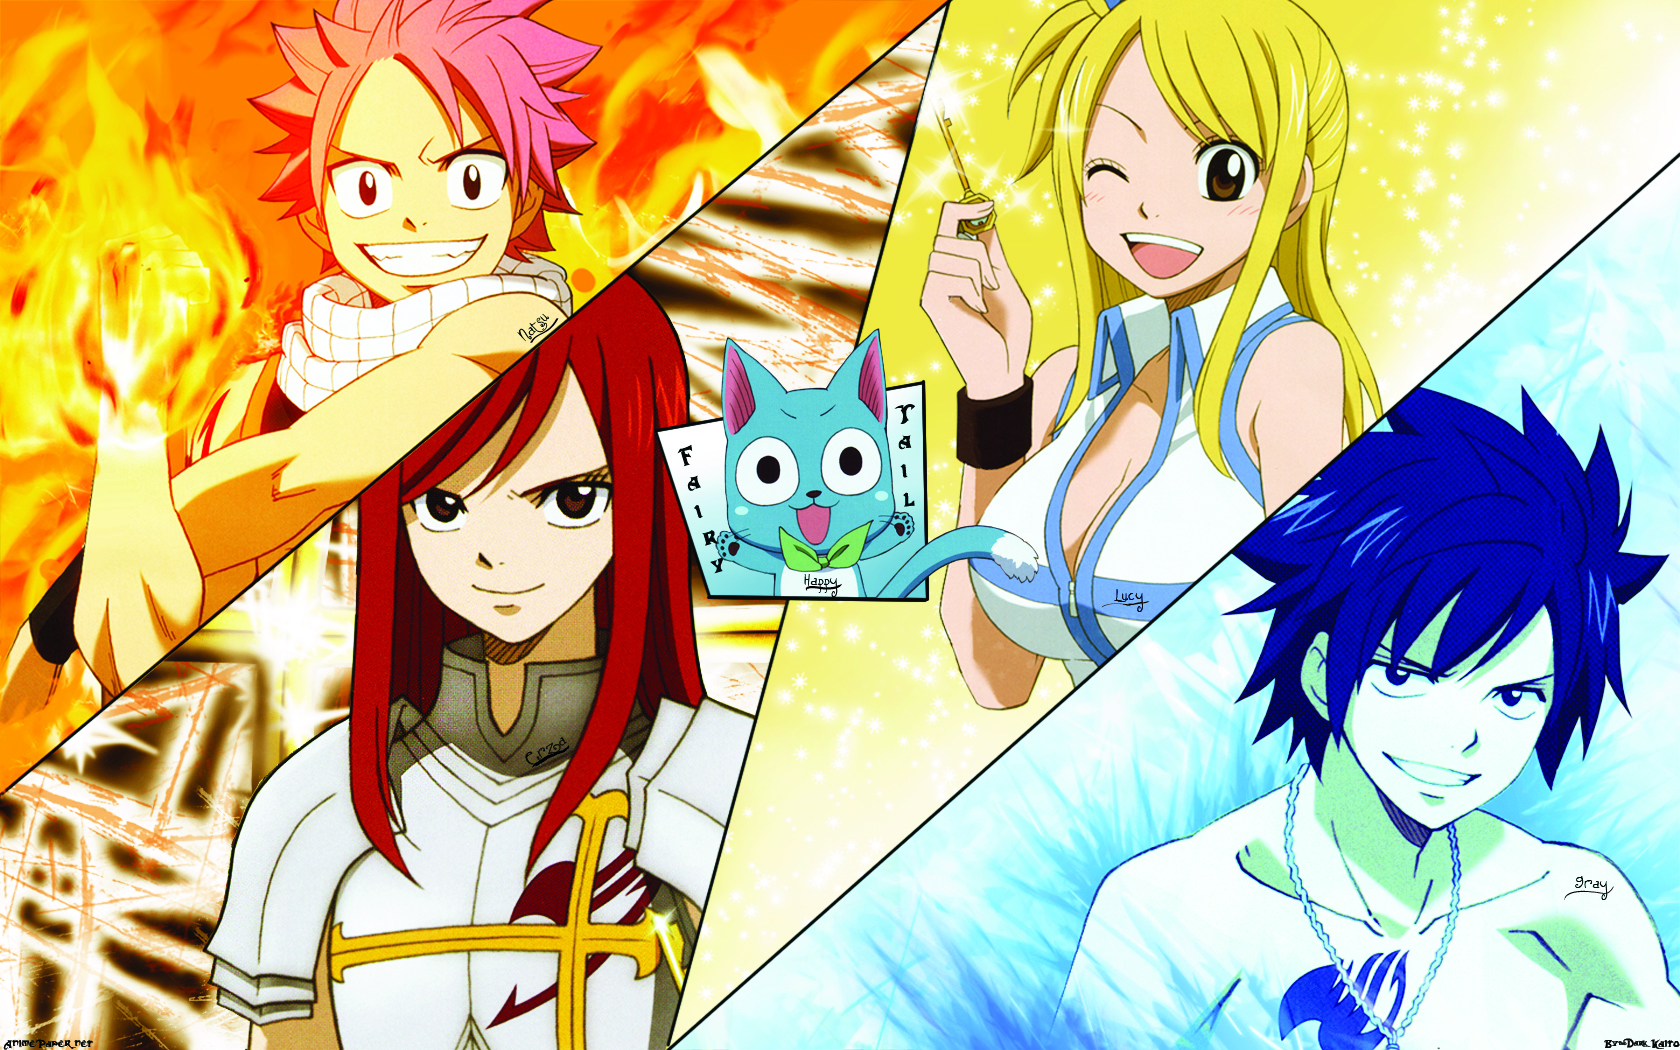 Fairy Tail Res: 1680x1050 / Size:2690kb. Views: 46013